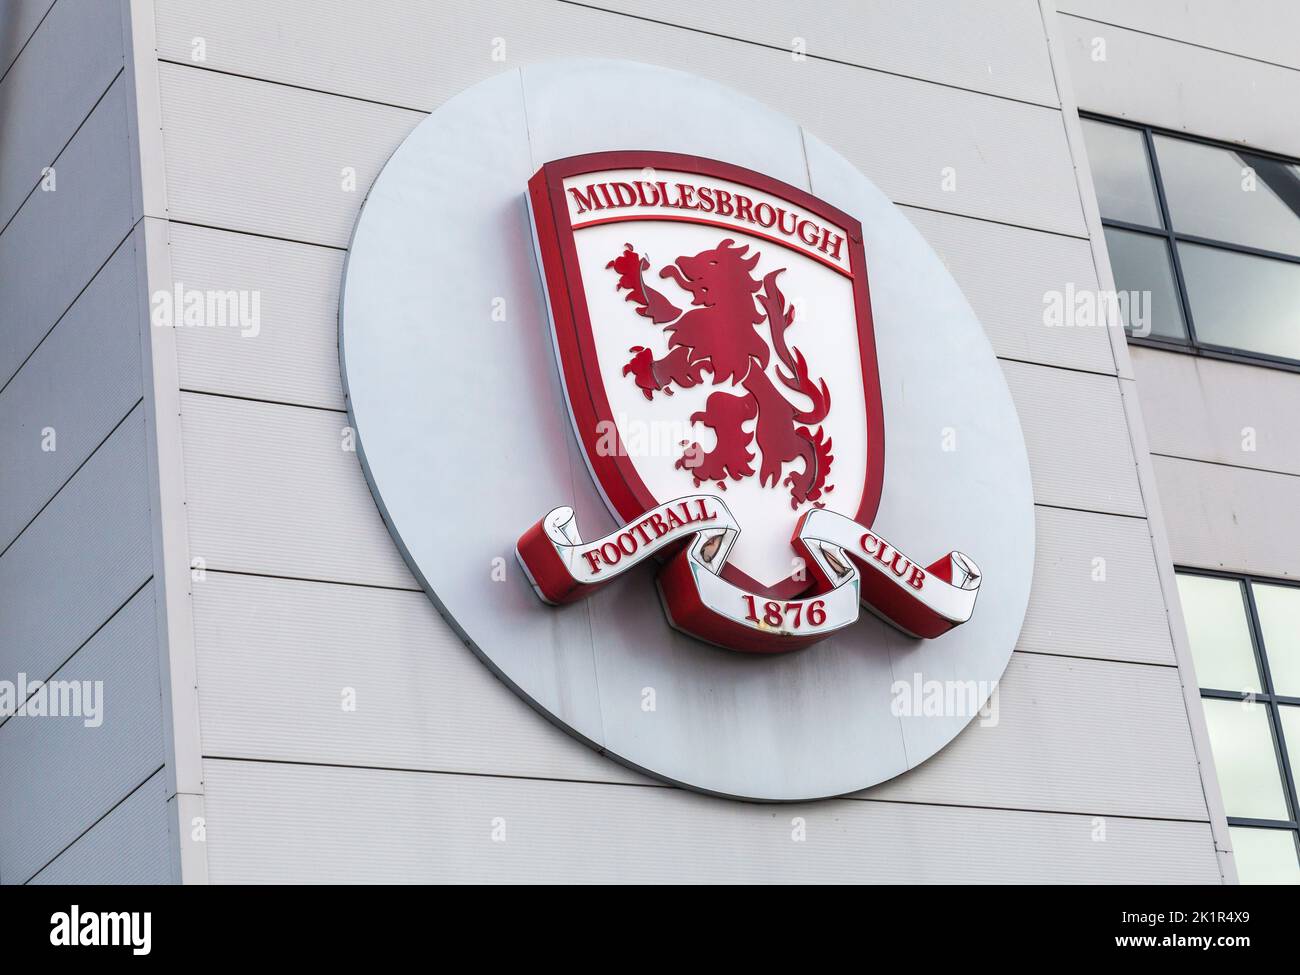 The Riverside Stadium,home of Middlesbrough Football Club, England,UK. Close up of club badge Stock Photo